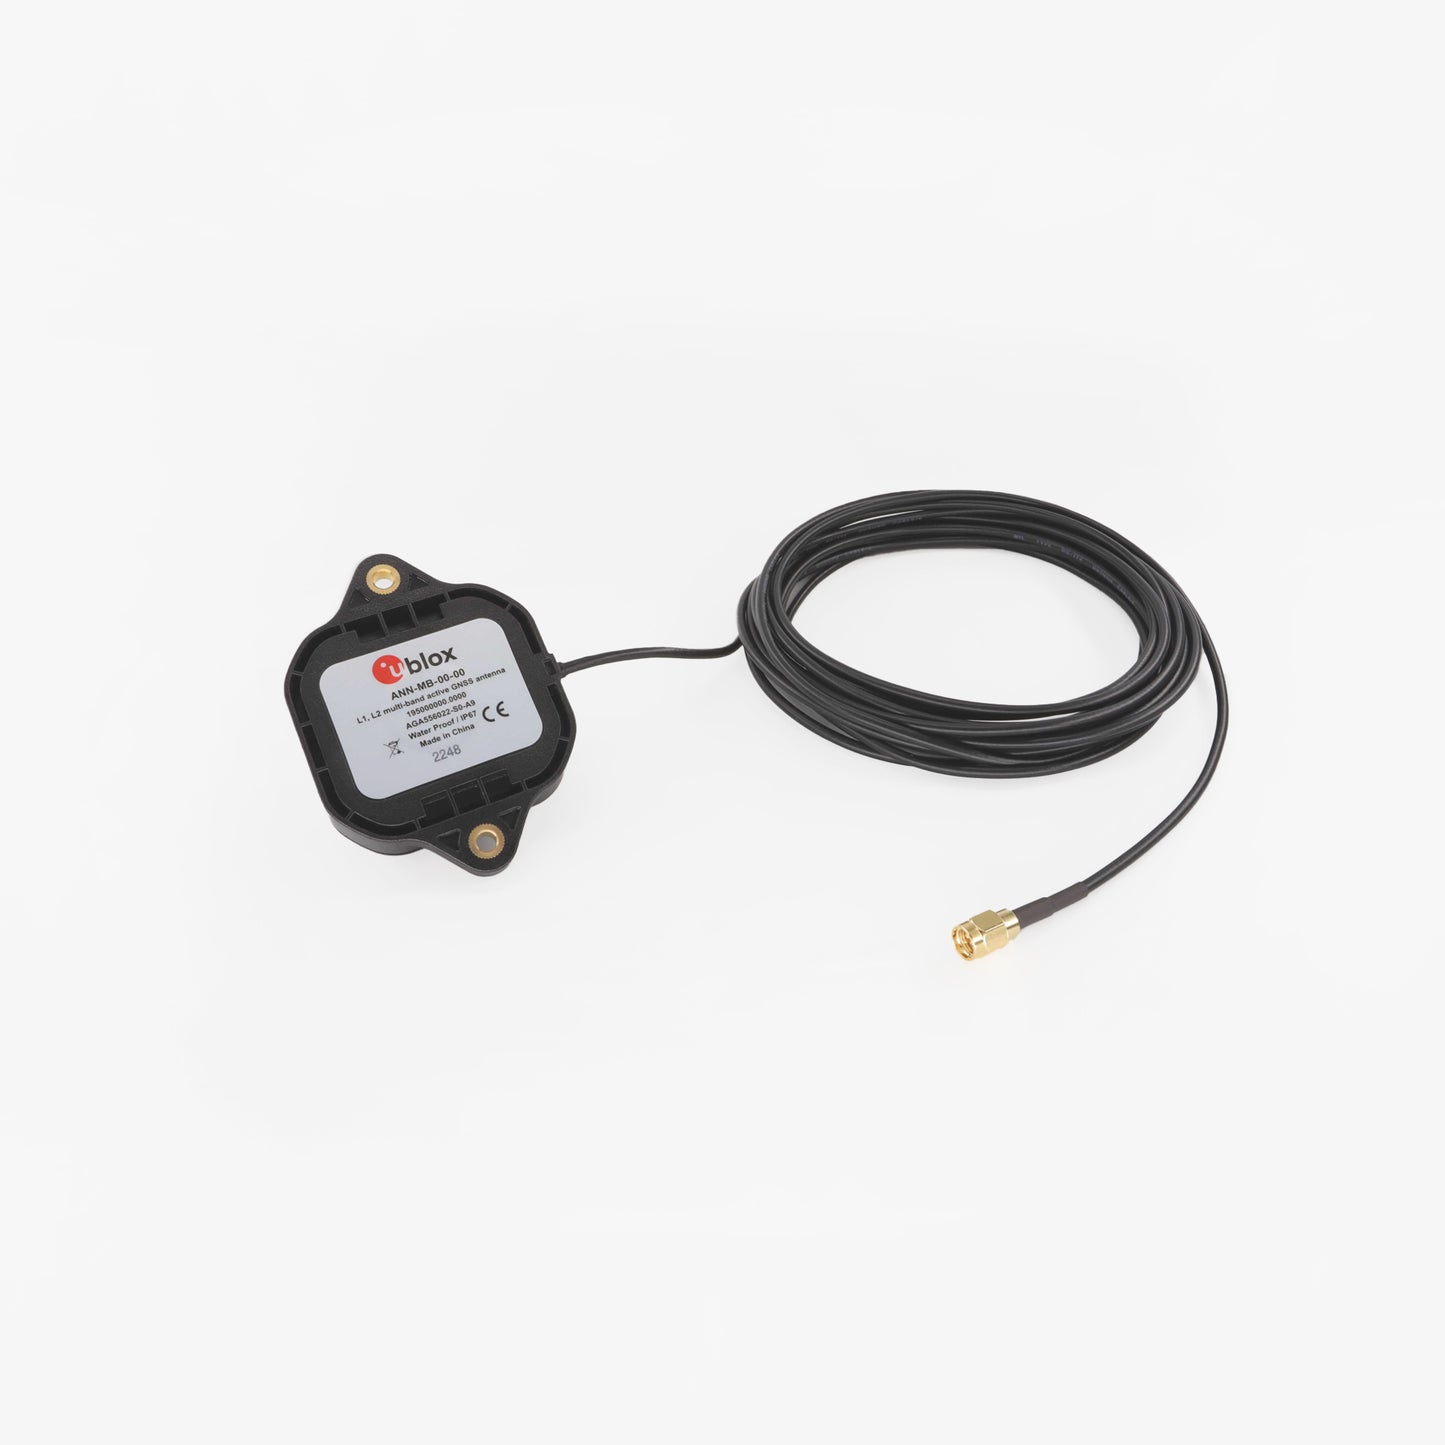 U-Blox_GPS_Antenna_with-cable_bottom